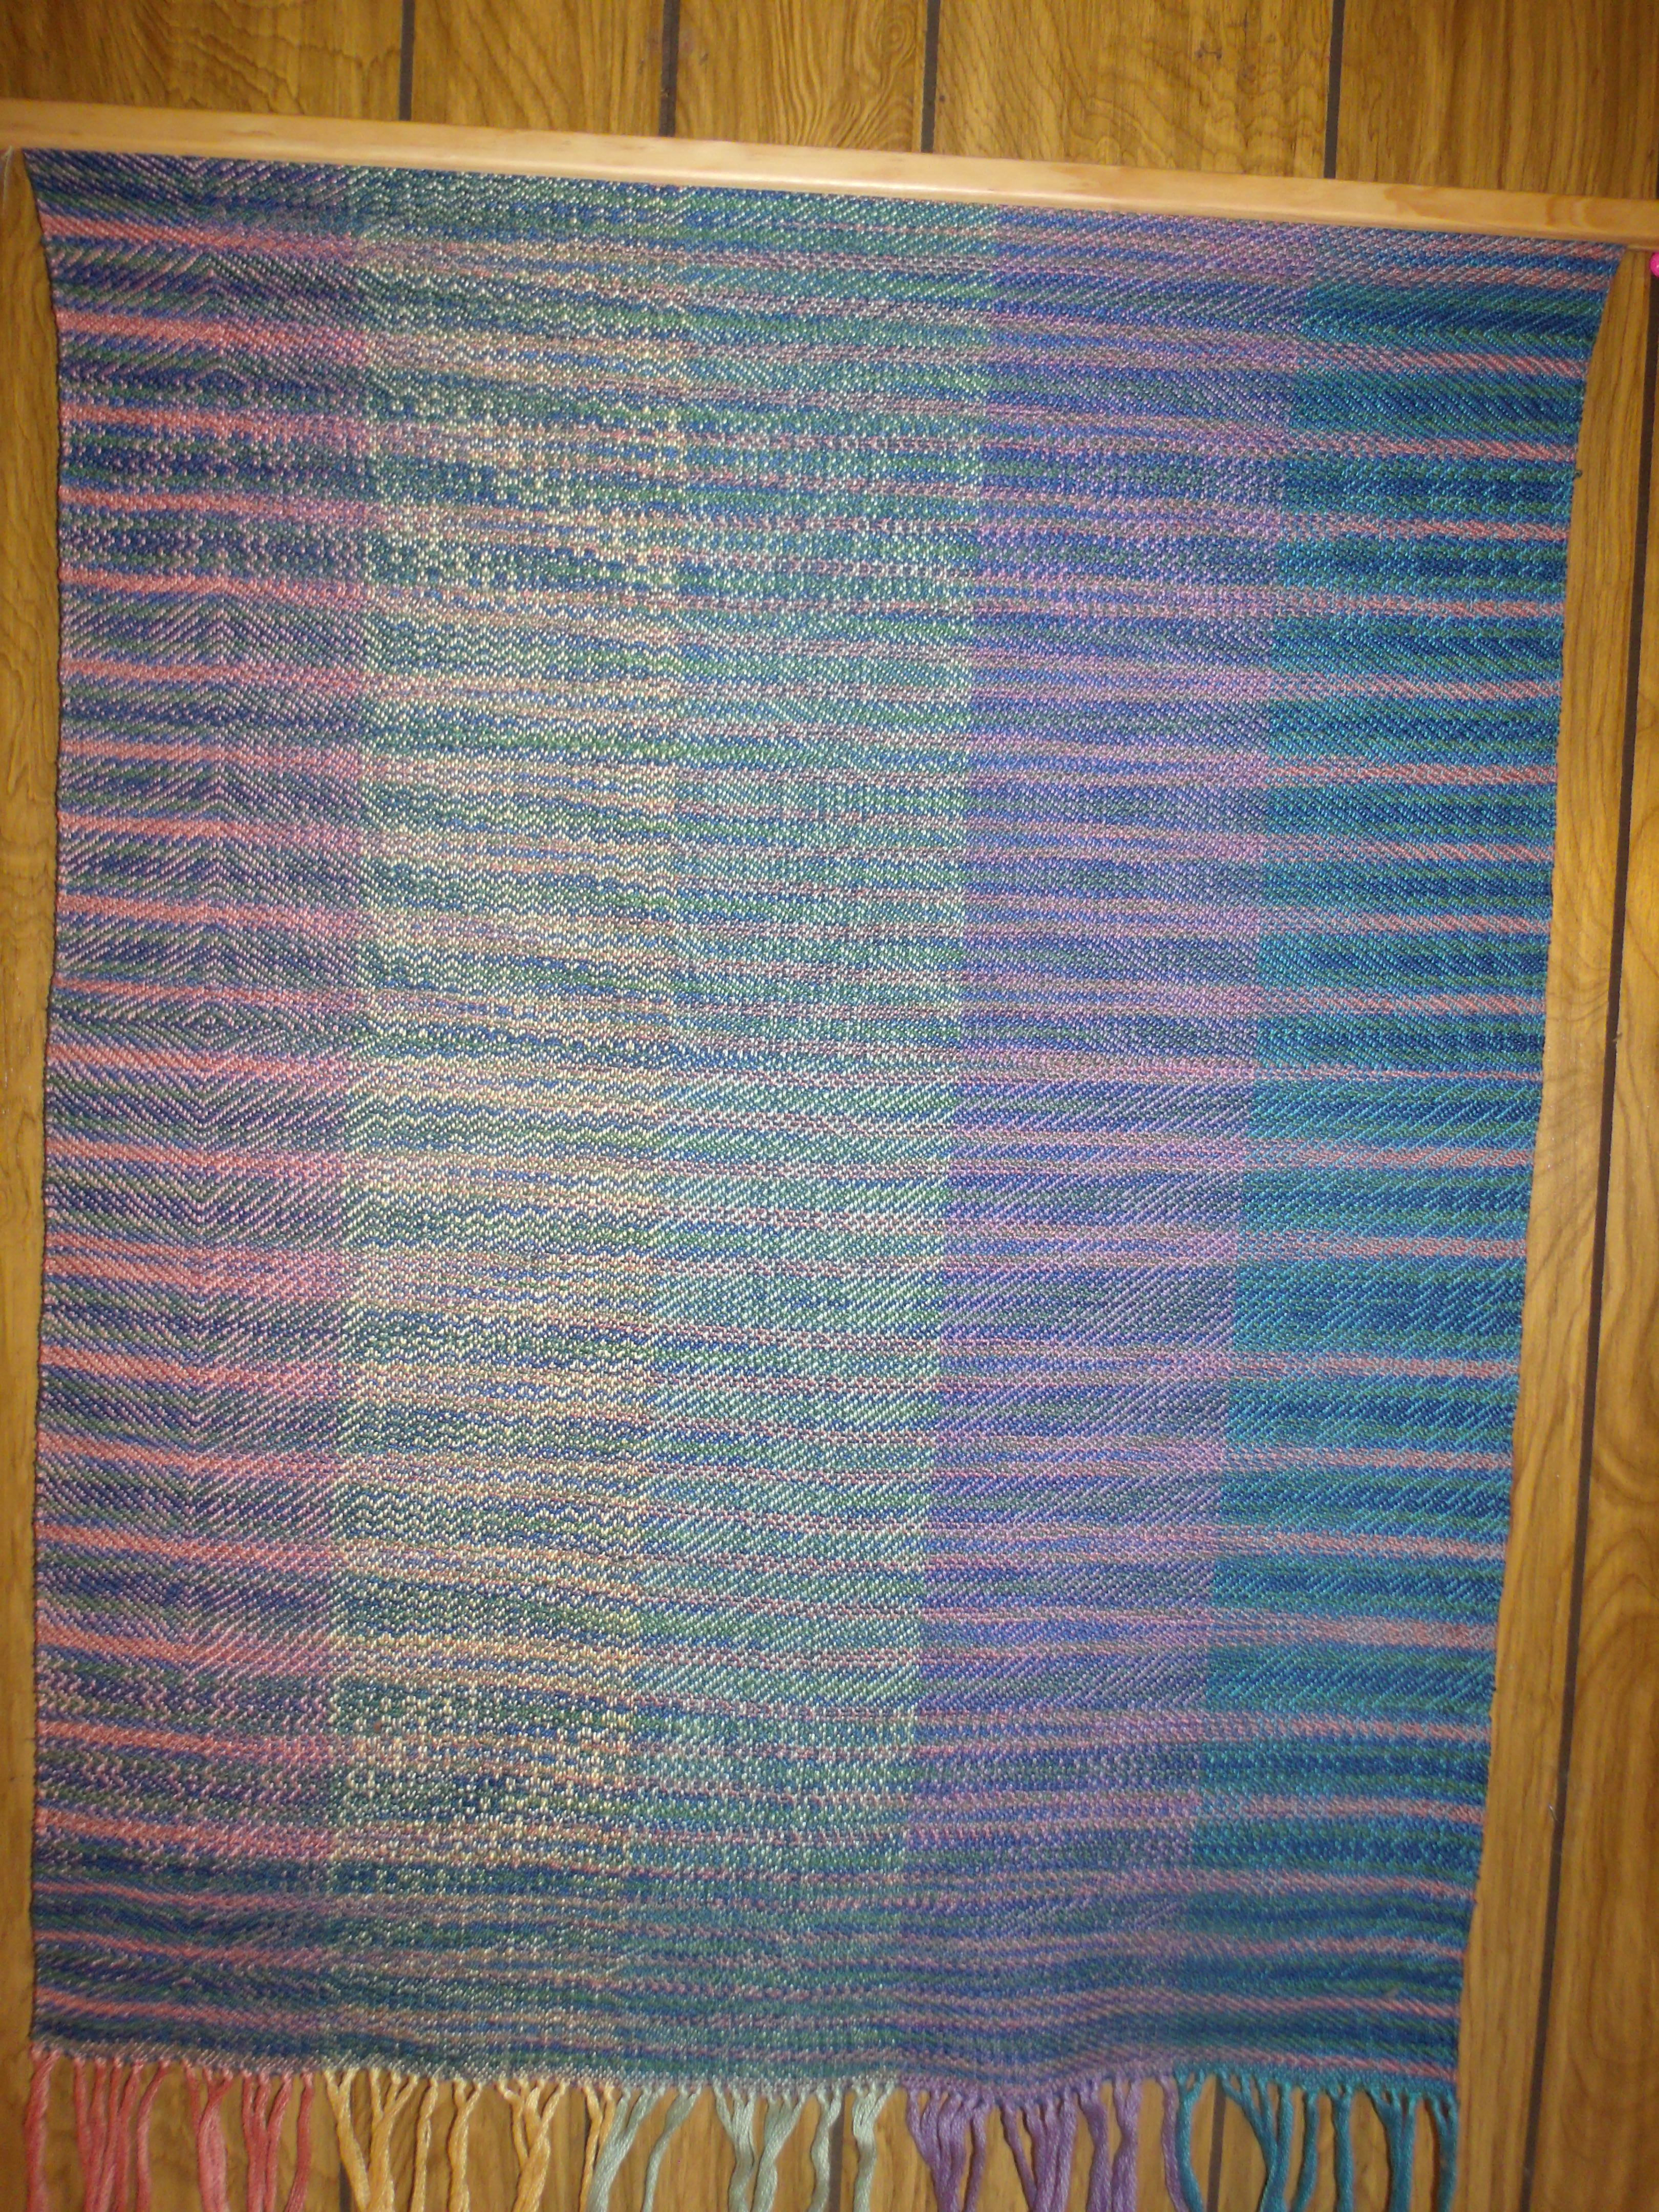 Twill Gamp weft face with space dyed yarn